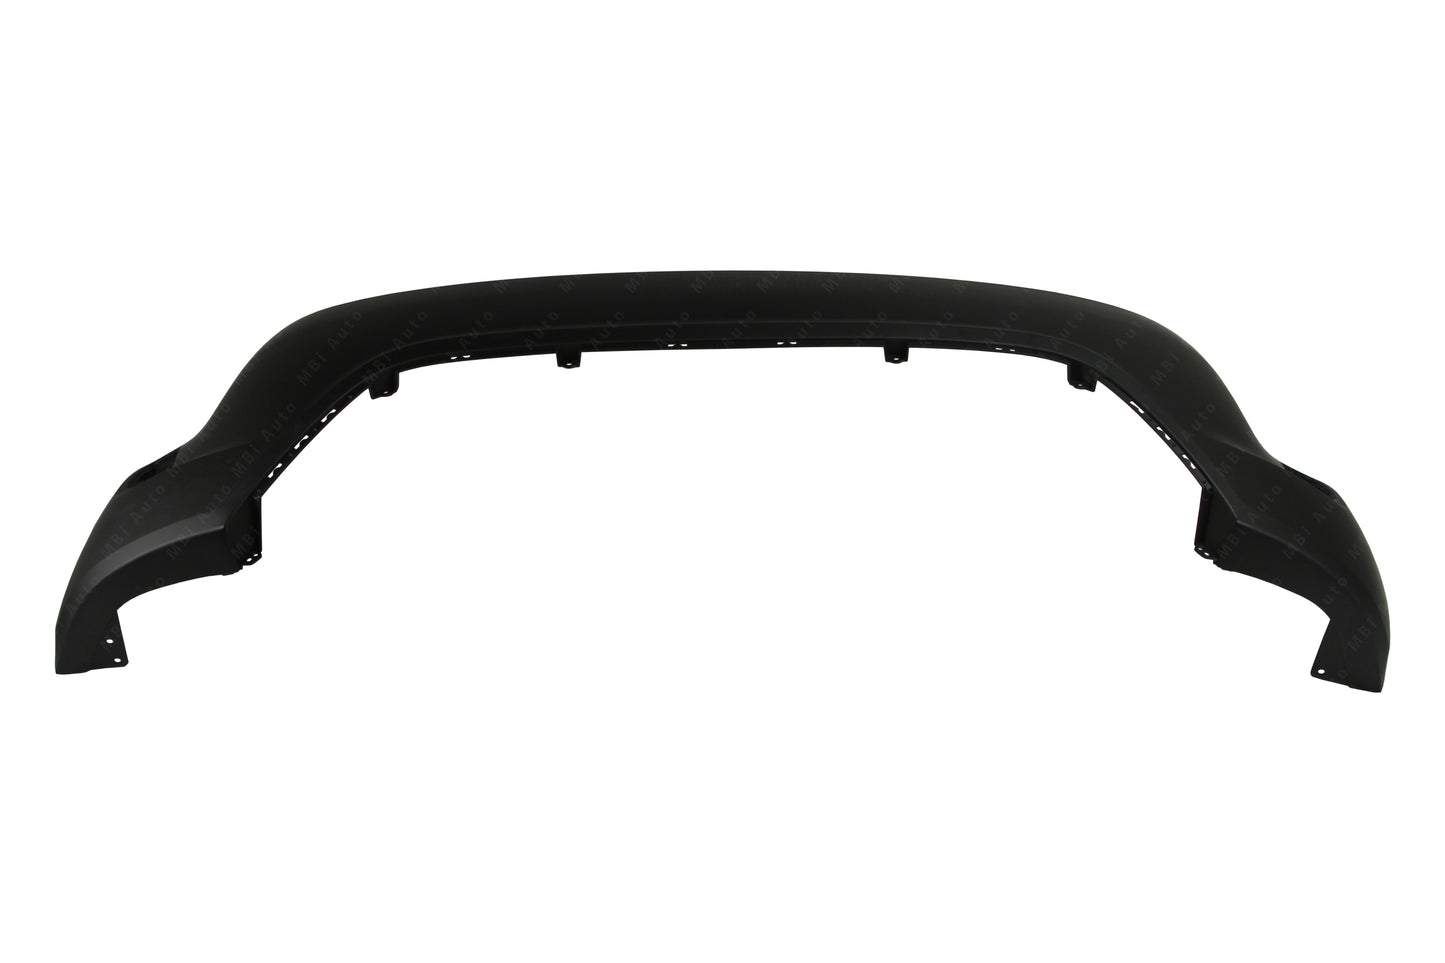 Hyundai Veloster 2012 - 2017 Front Bumper Cover 12 - 17 HY1100186 Bumper-King